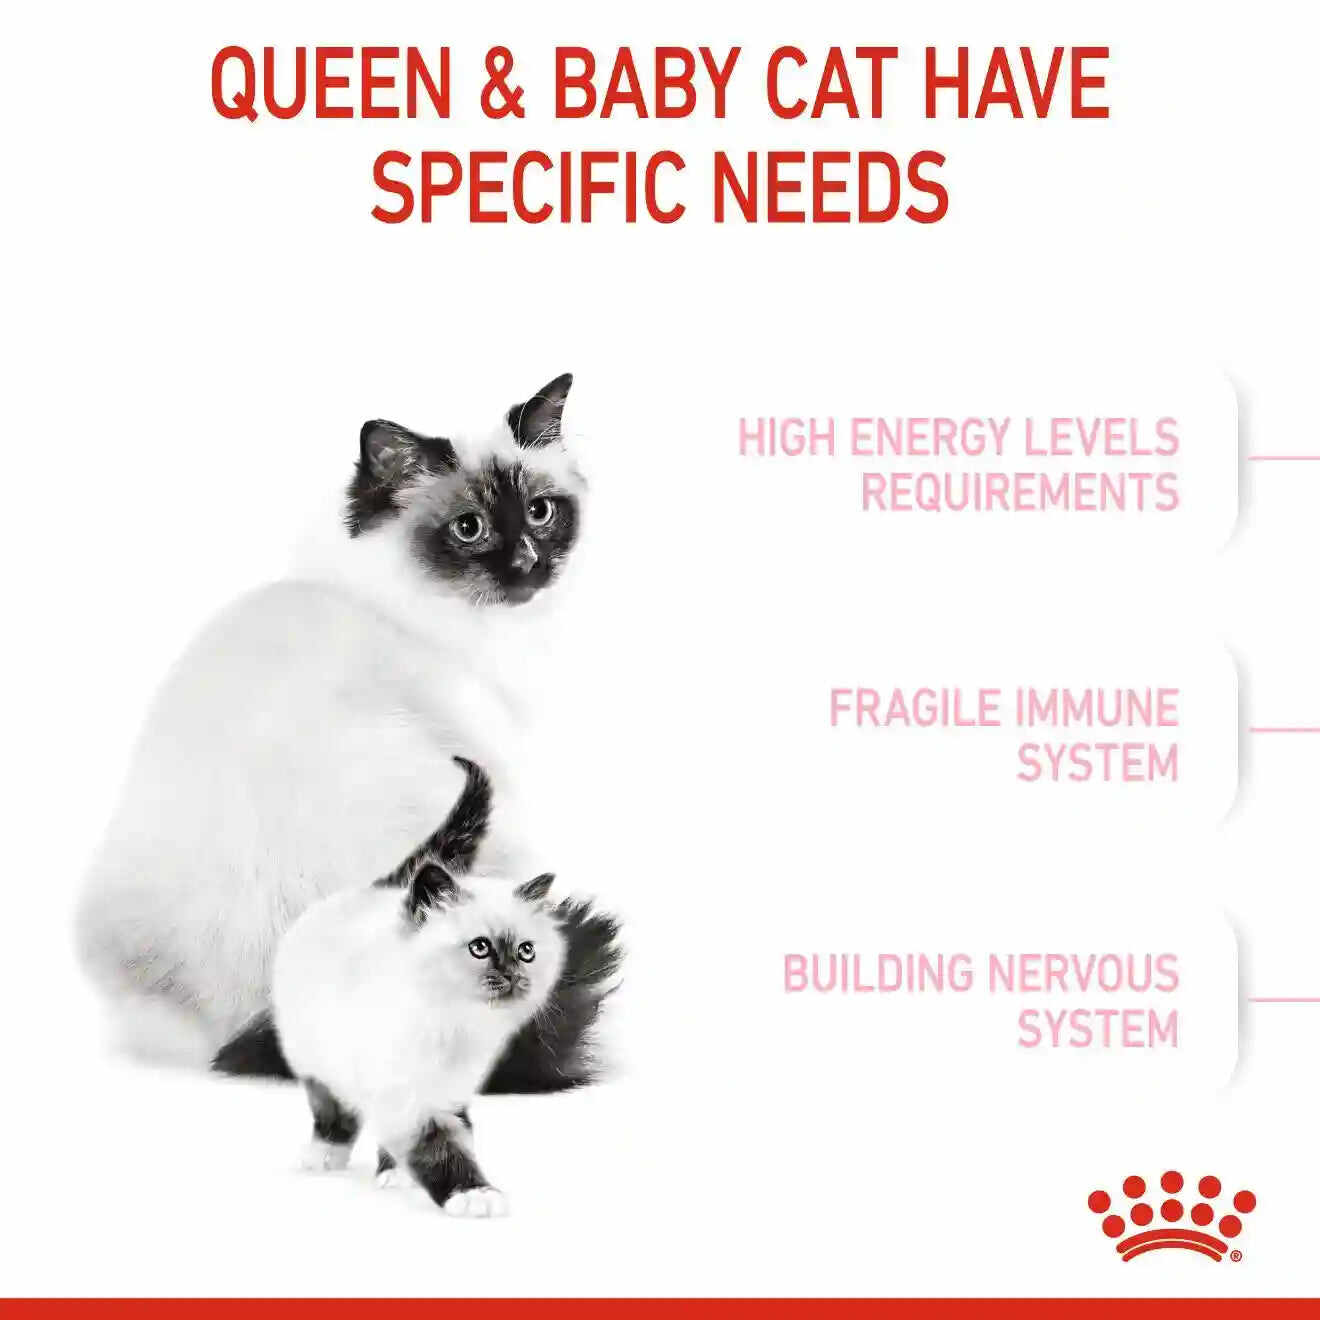 Royal Canin - Mother & Babycat Dry Food (1-4 Months)